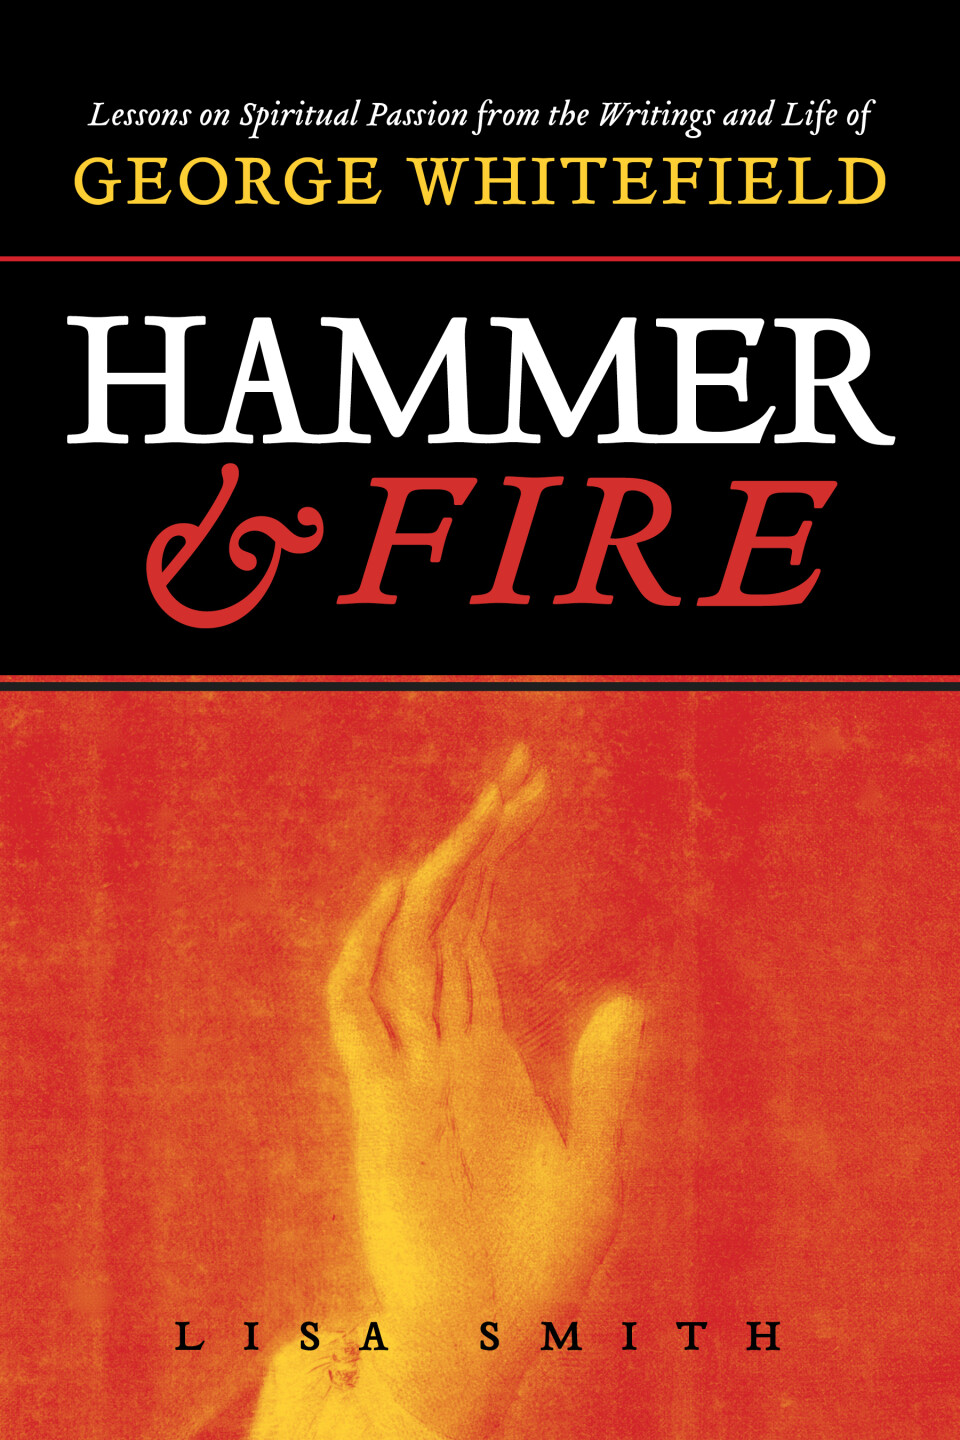 Hammer of Fire--George Whitefield